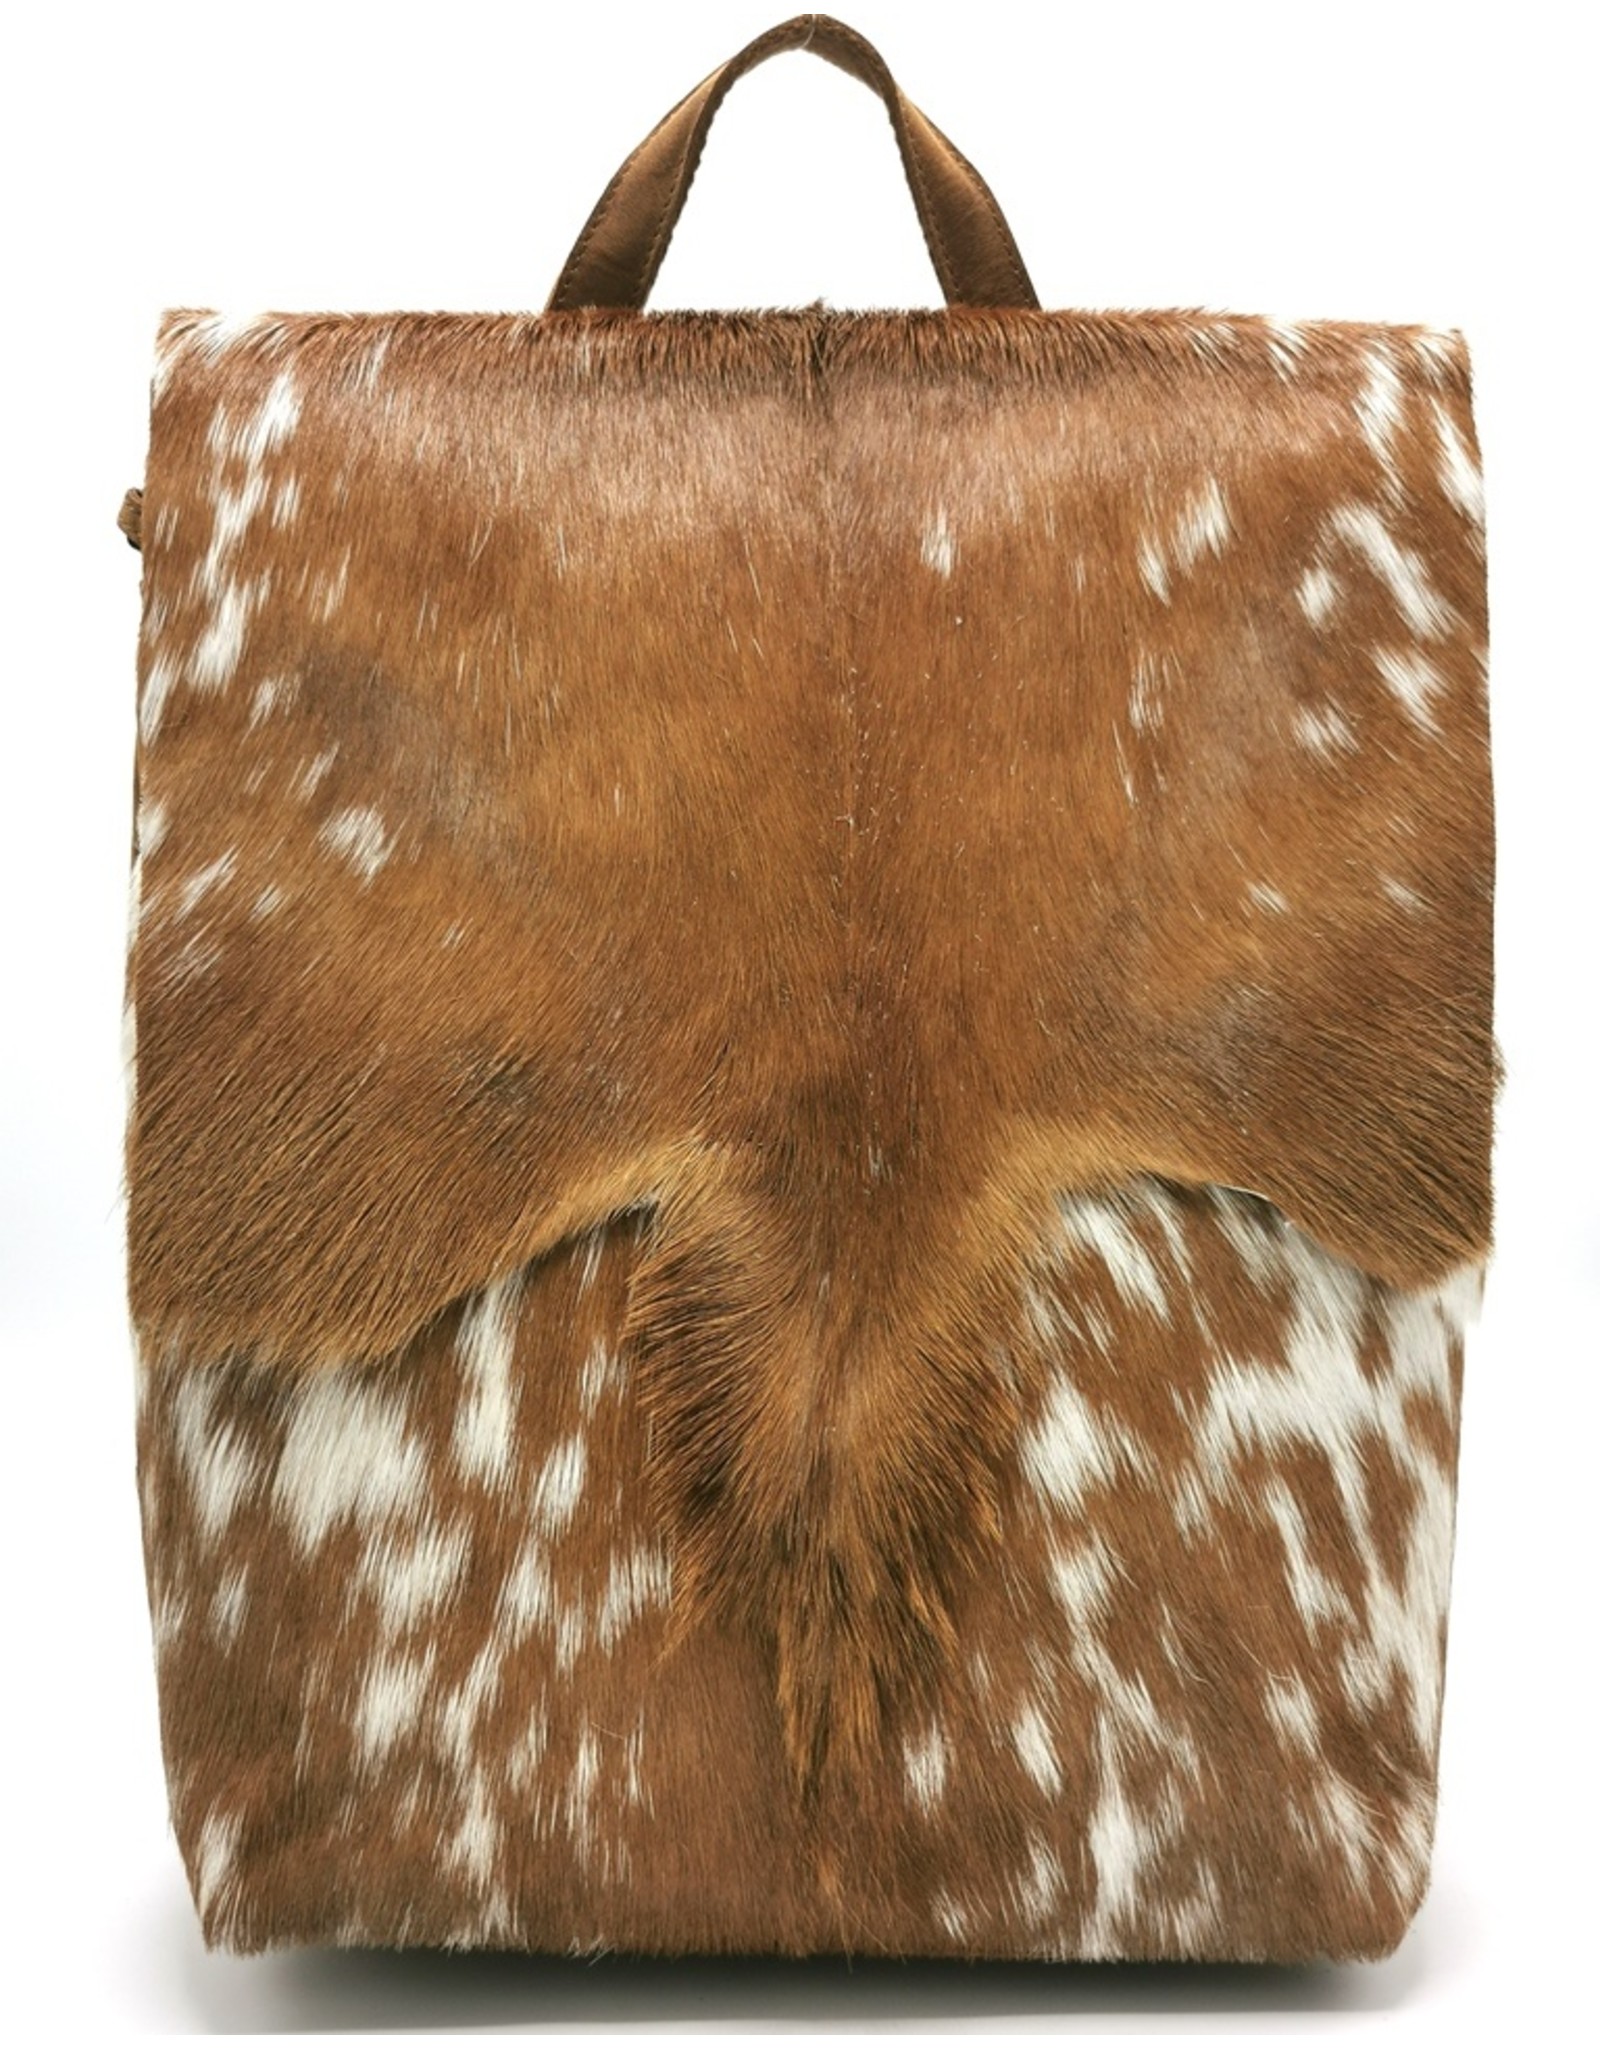 Hide & Stitches Leather backpacks  and leather shoppers - Hide & Stitches Leather Backpack with Fur Cover Brown